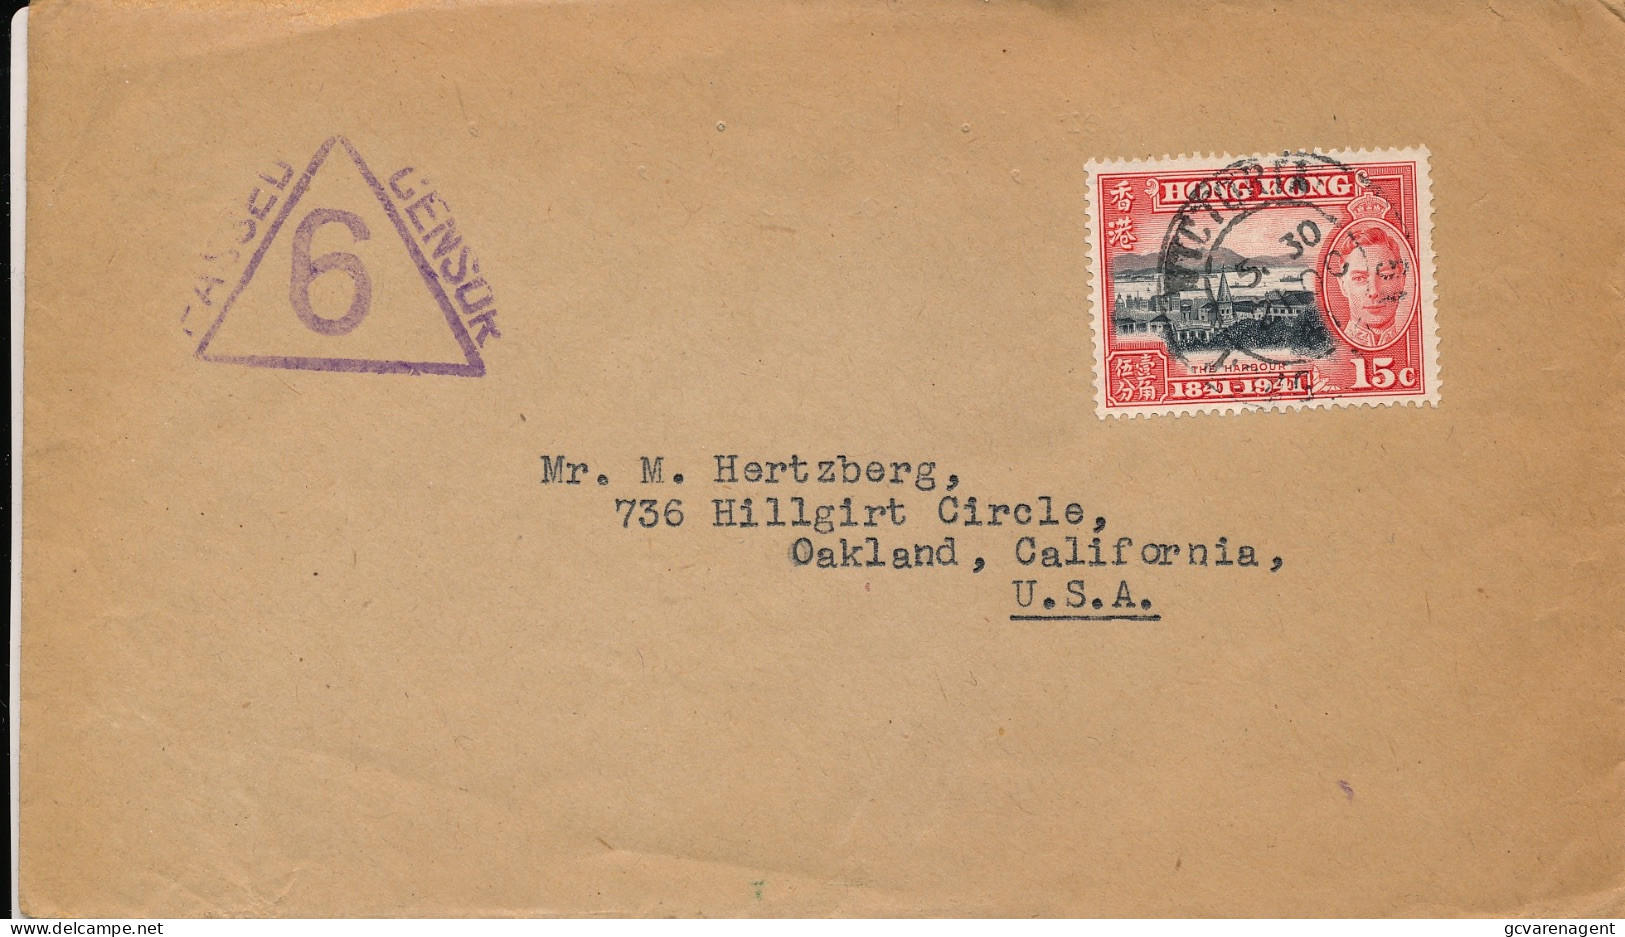 HONG KONG  PASSED CENS0R  6   TO  OAKLAND, CALIFORNIA  U.S.A         ZIE AFBEELDINGEN - 1941-45 Japanese Occupation